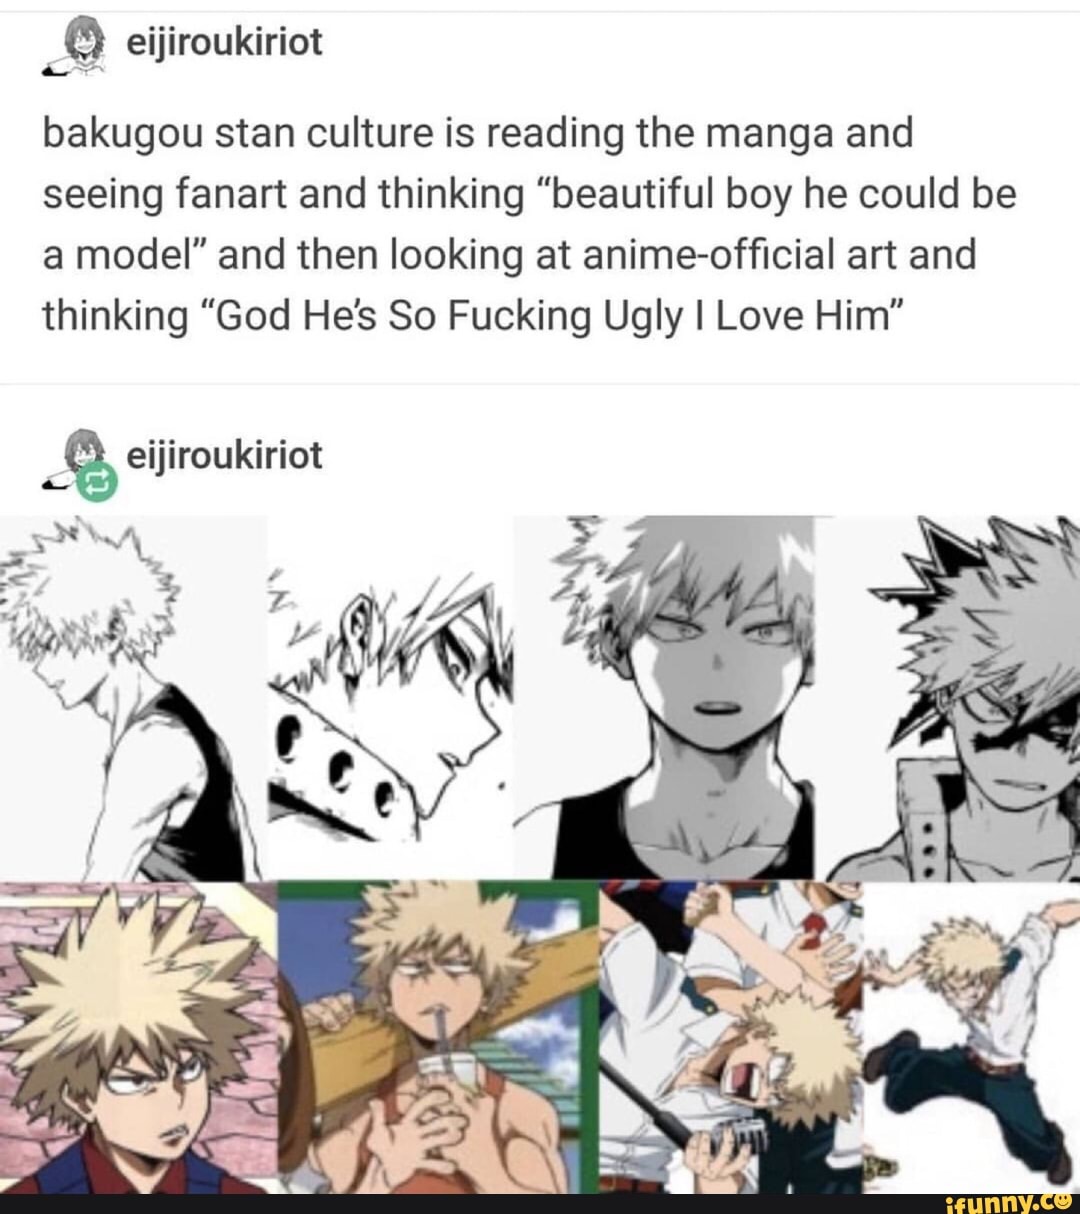 Bakugou Stan Culture Is Reading The Manga And Seeing Fanart And Thinking Beautiful Boy He Could Be A Model And Then Looking At Anime Ofﬁcial Art And Thinking God He S So Fucking Ugly